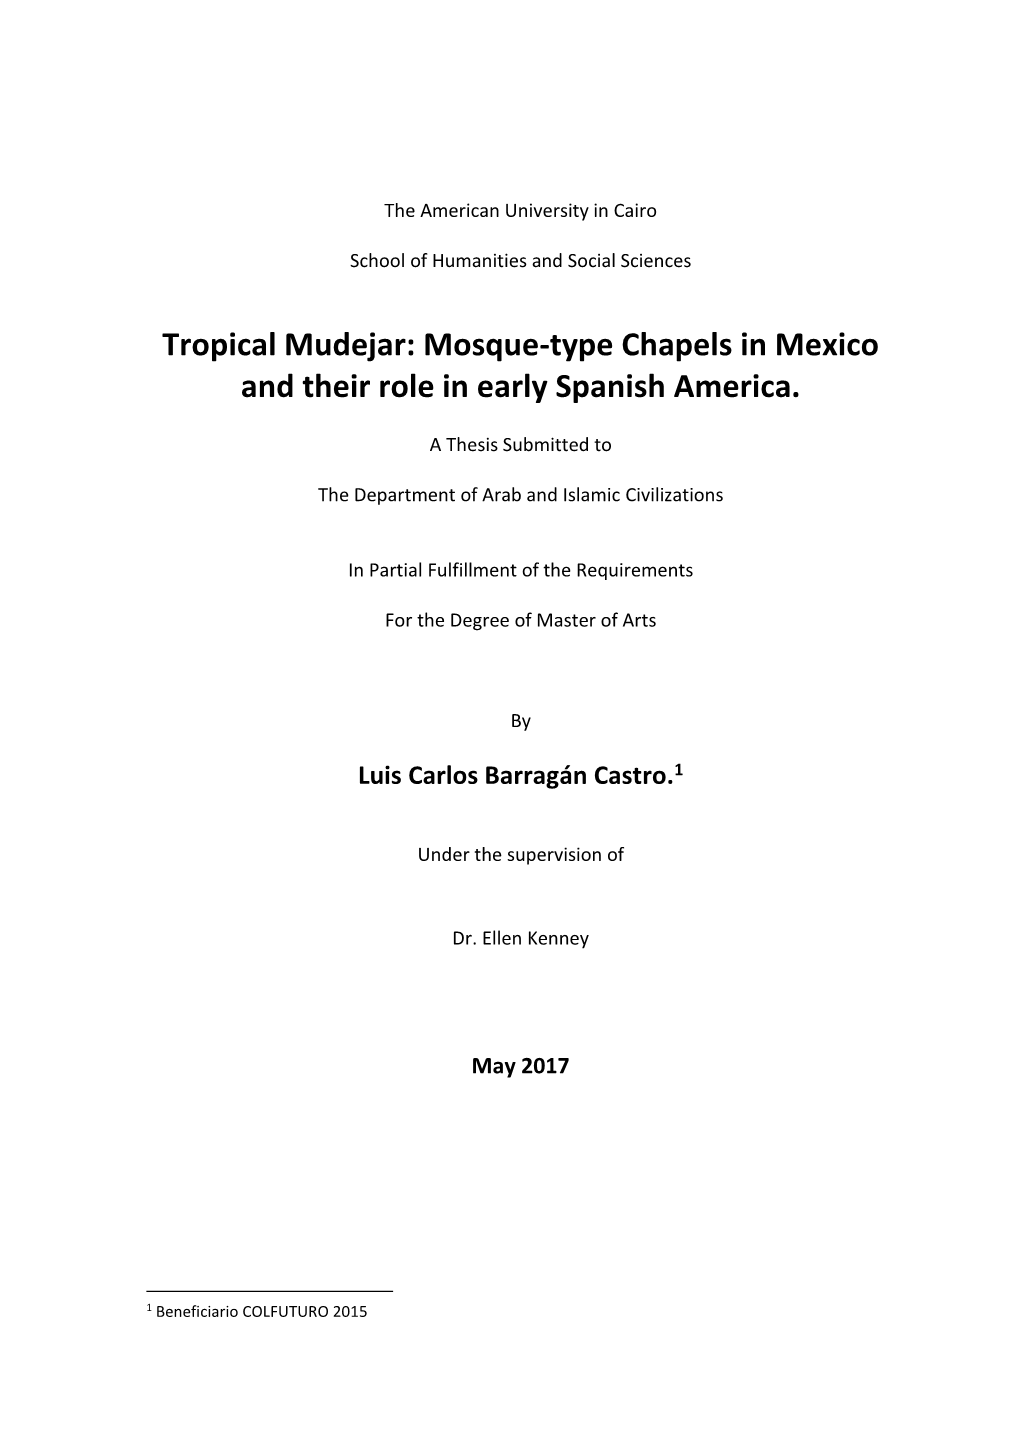 Tropical Mudejar: Mosque-Type Chapels in Mexico and Their Role in Early Spanish America